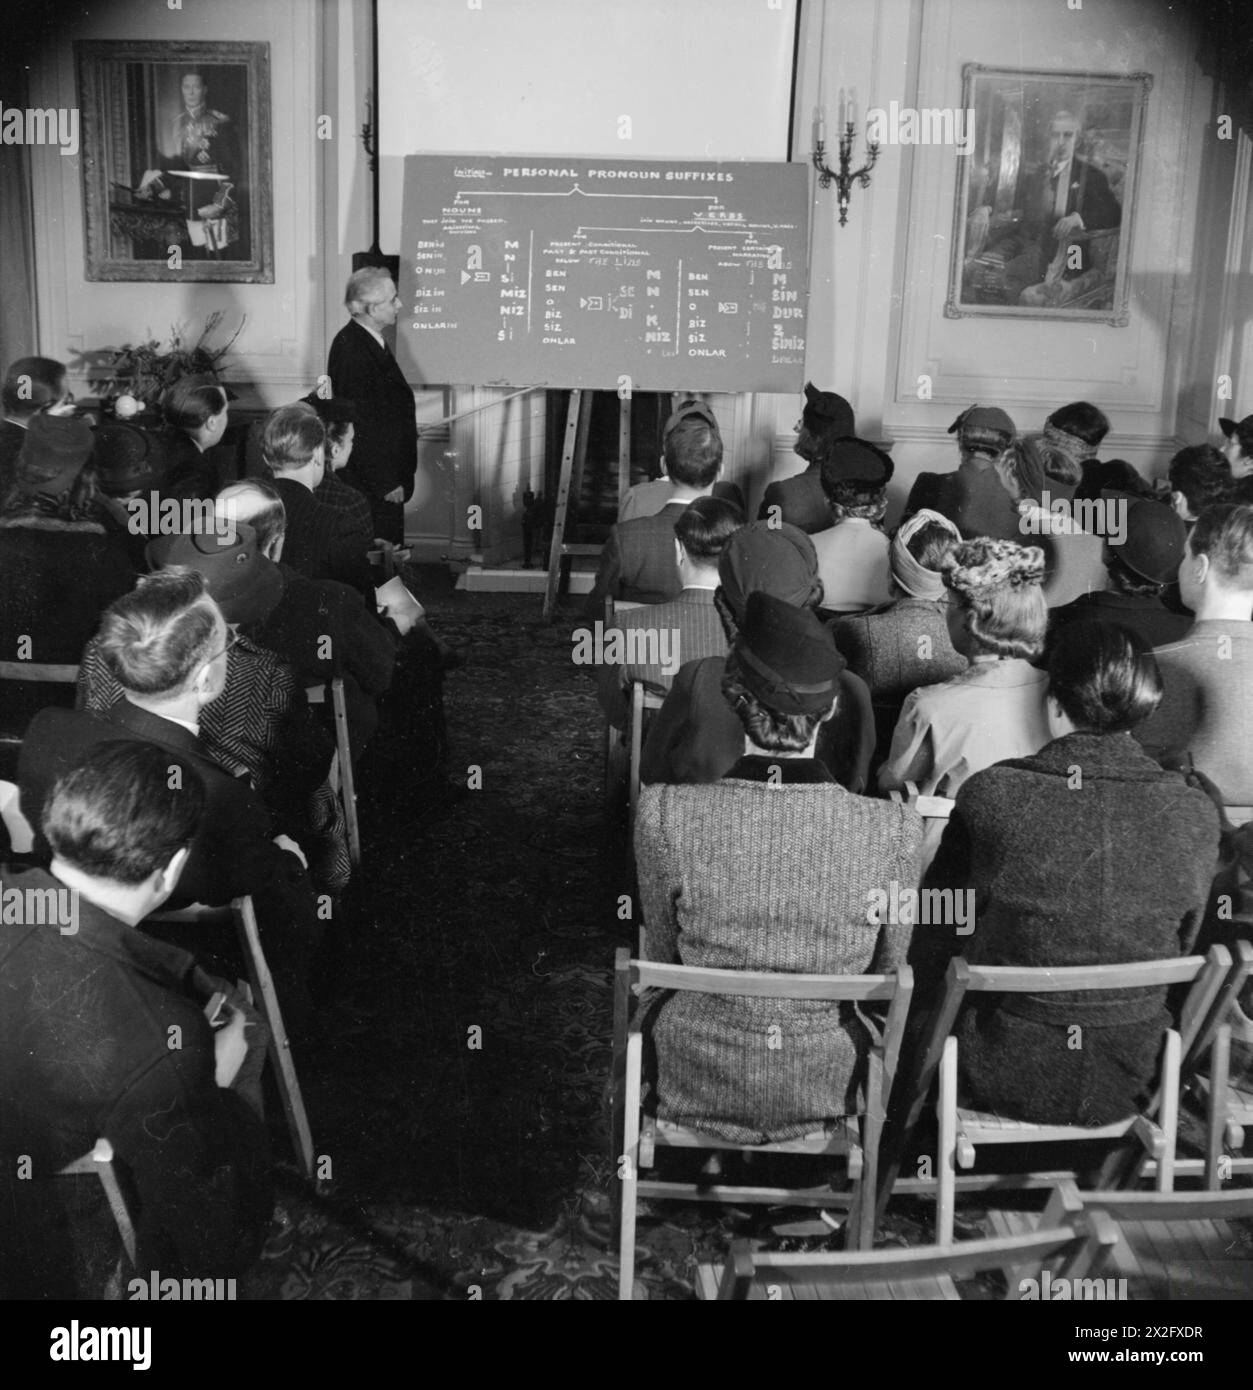 BRITONS LEARN TURKISH: ADULT EDUCATION IN LONDON, 1943 - Bay Ali Riza Sencan, Secretary of the Halkevi, points to the blackboard whilst teaching the class about the three different personal pronoun suffixes. The students sit in rows in an ornate room, with portraits of King George VI and President Inonu on display on the walls. Turkish language classes are held here twice a week Stock Photo